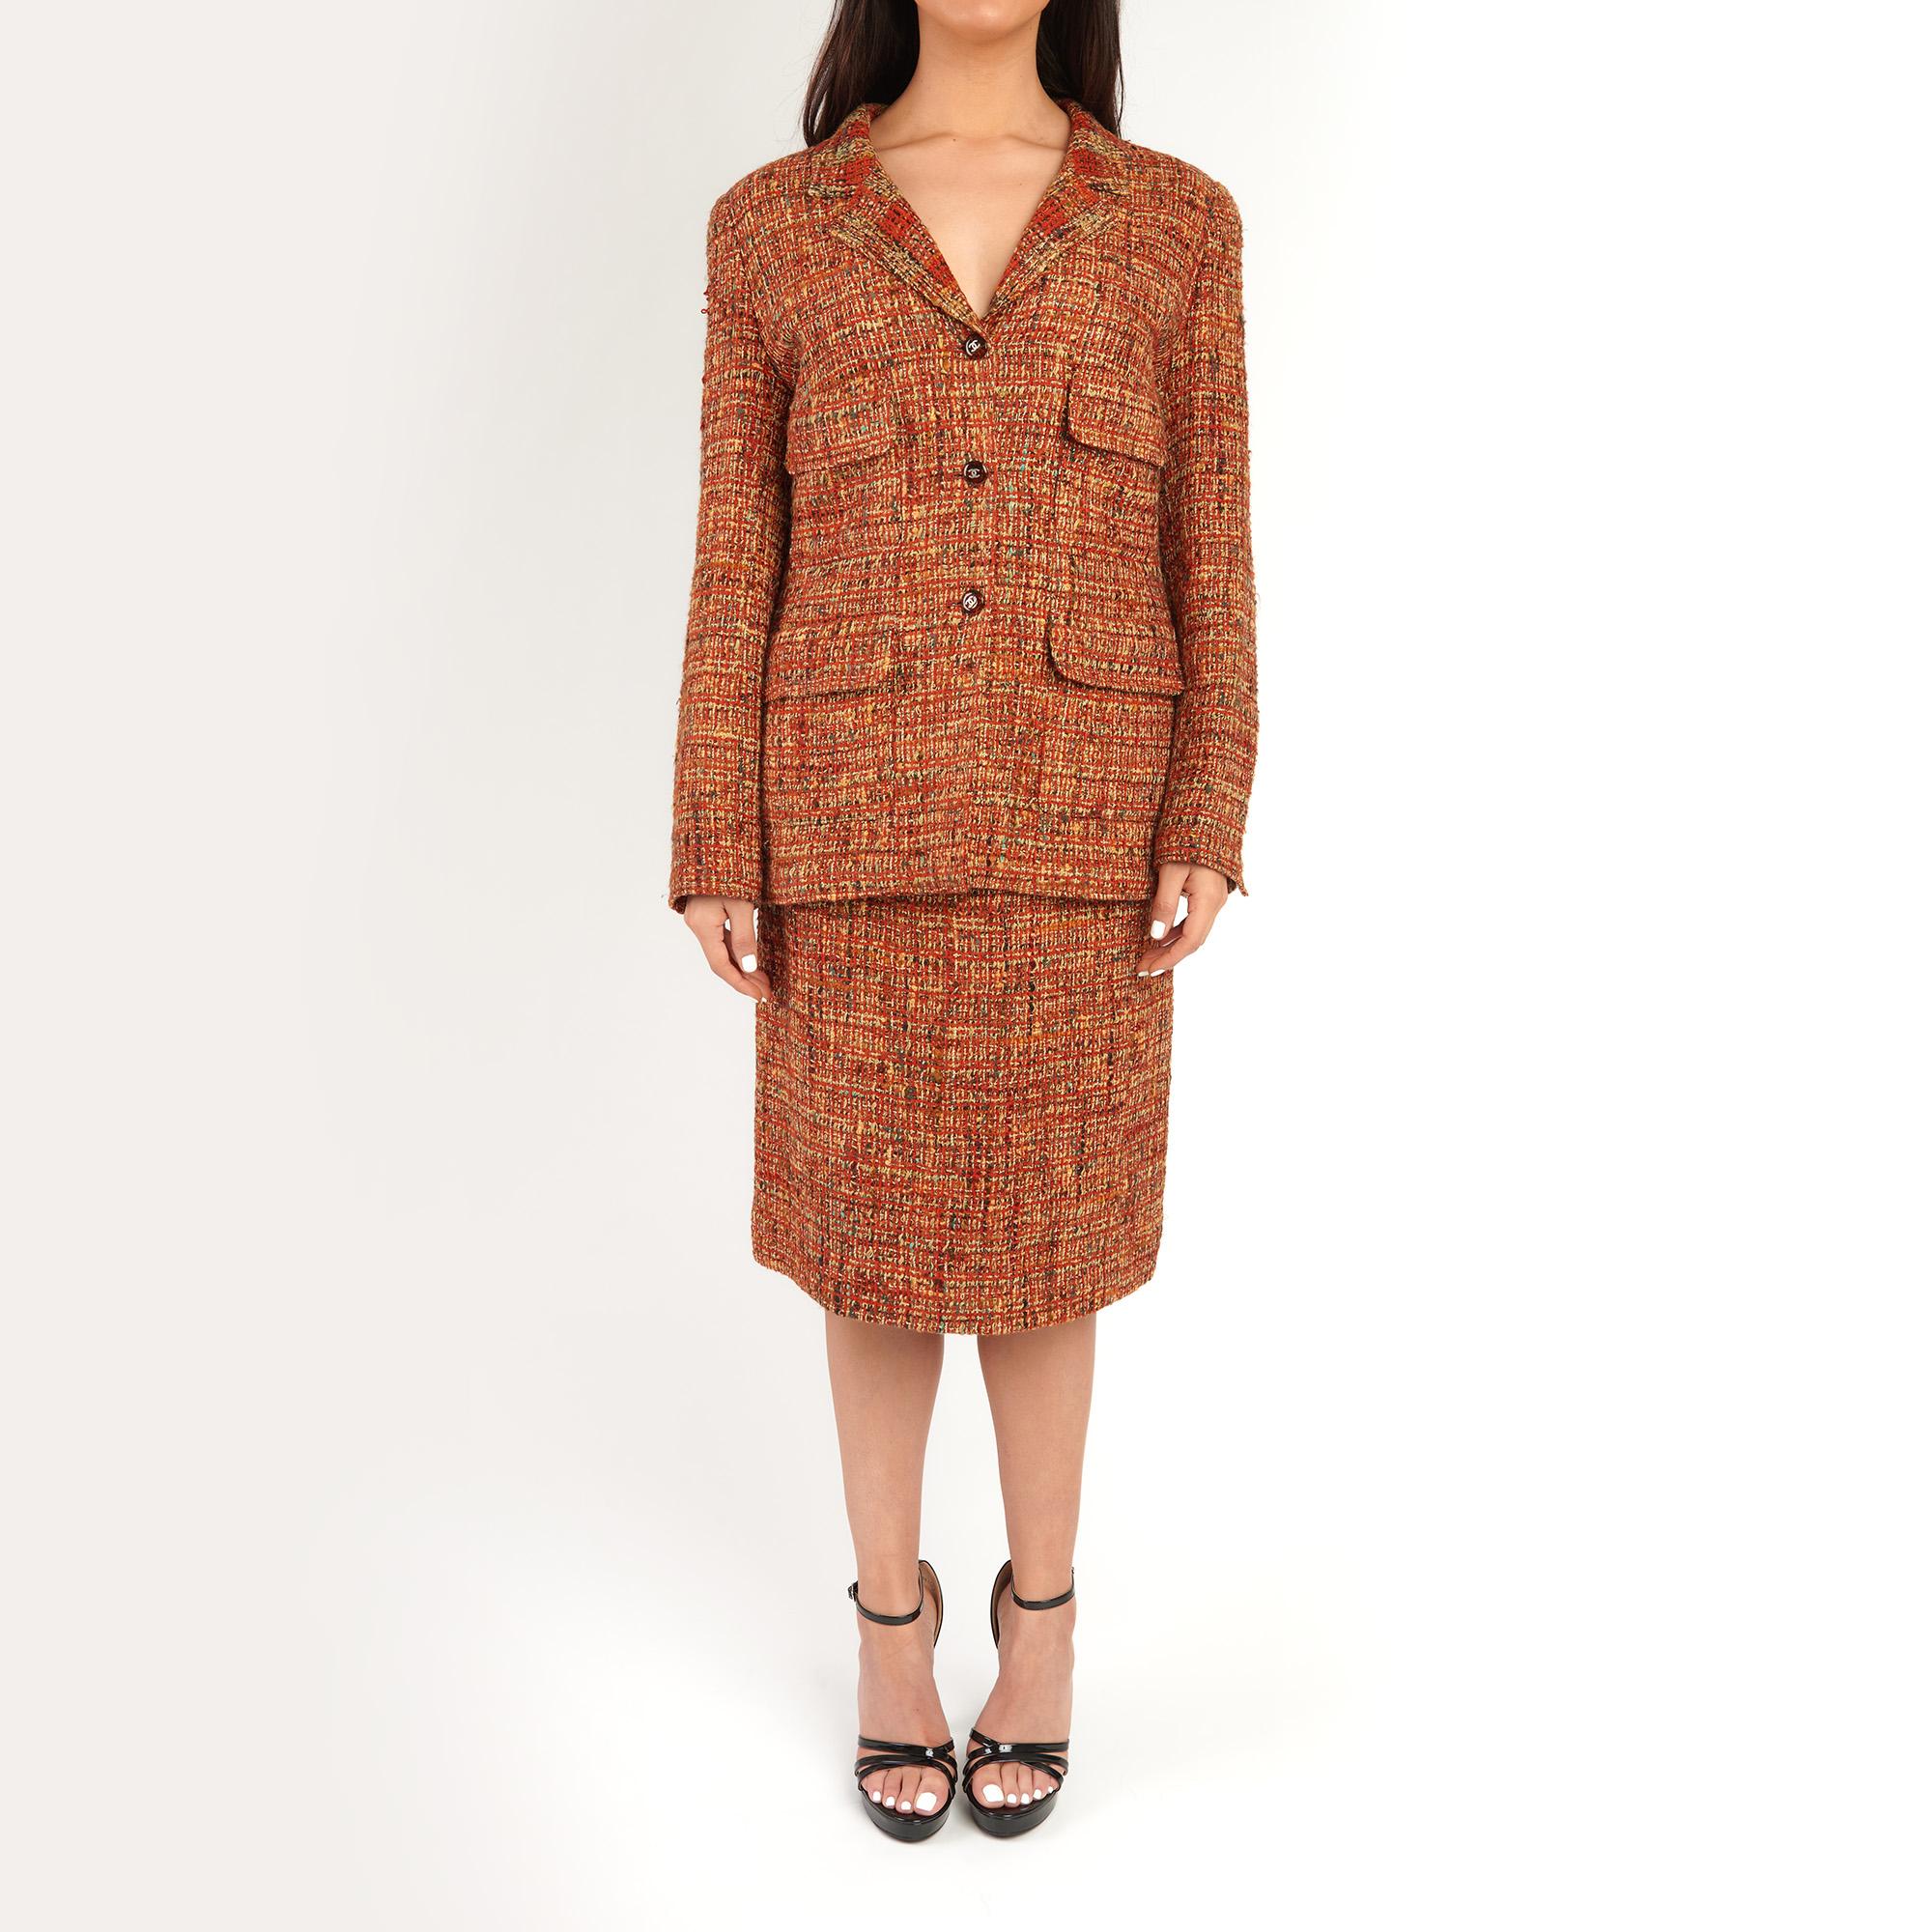 WAHF-C003
1990's Chanel Orange & Beige Wool Tweed Vintage Skirt Suit

Jacket: EU 40 (UK 10) Skirt: EU 40 (UK 10) - Fits UK Size 8-10
75% Wool, 25% Acrylic

(Made in France)

This item is in excellent condition with light signs of use throughout.